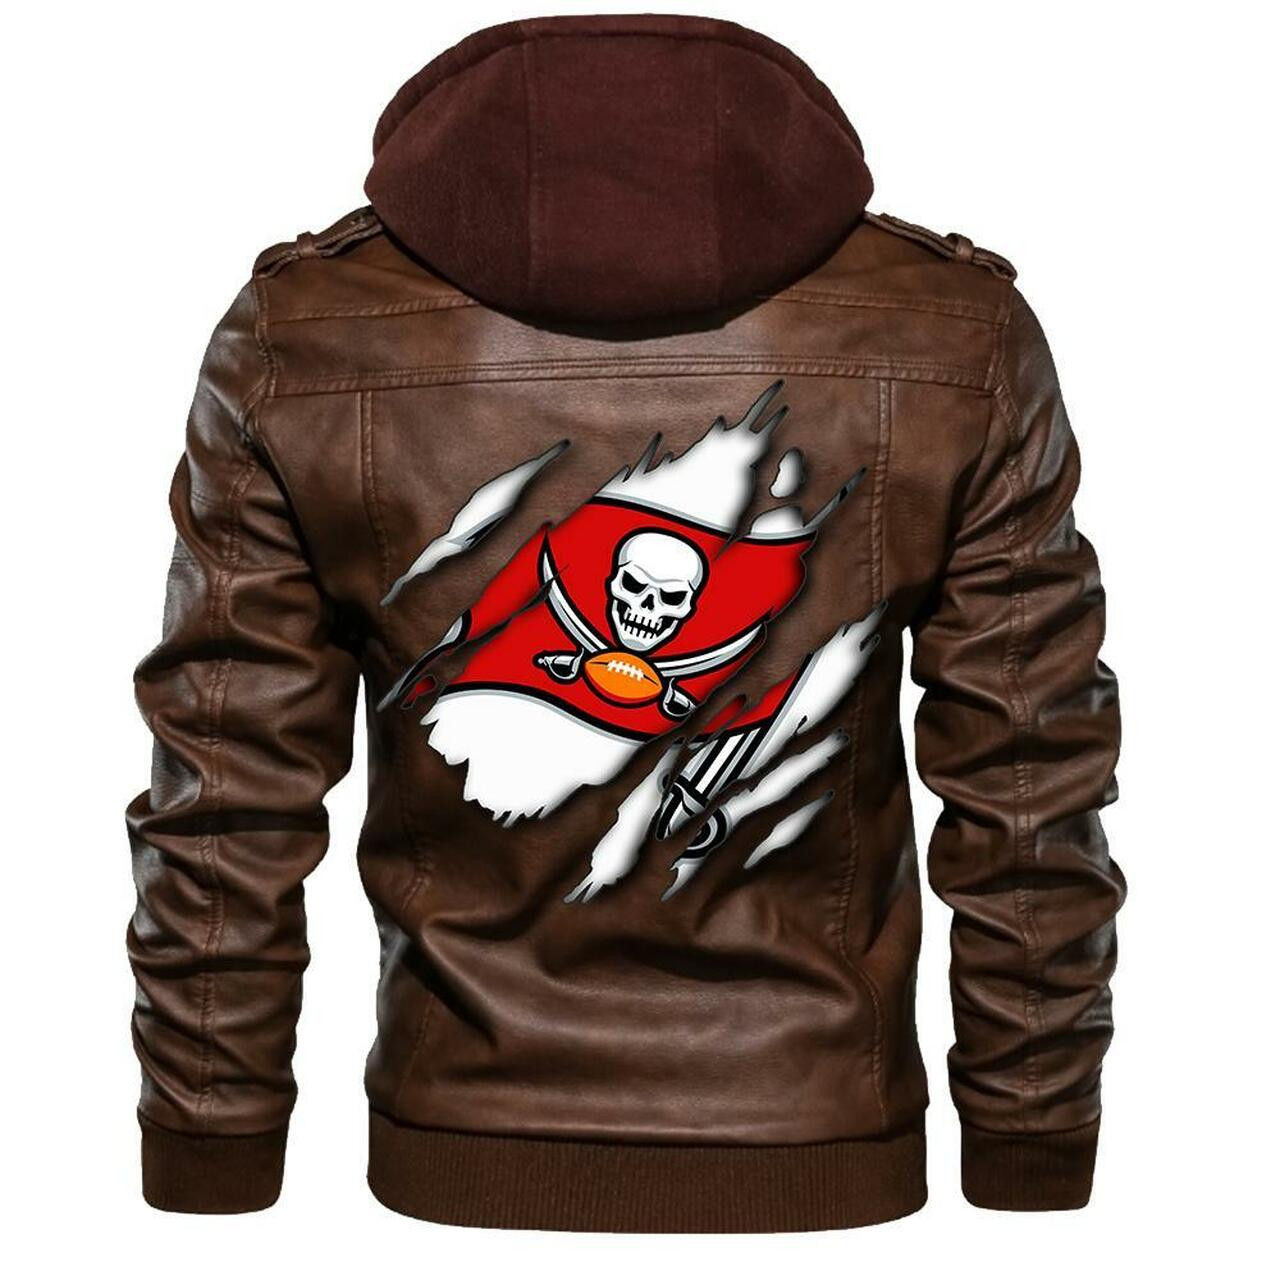 Check out and find the right leather jacket below 169